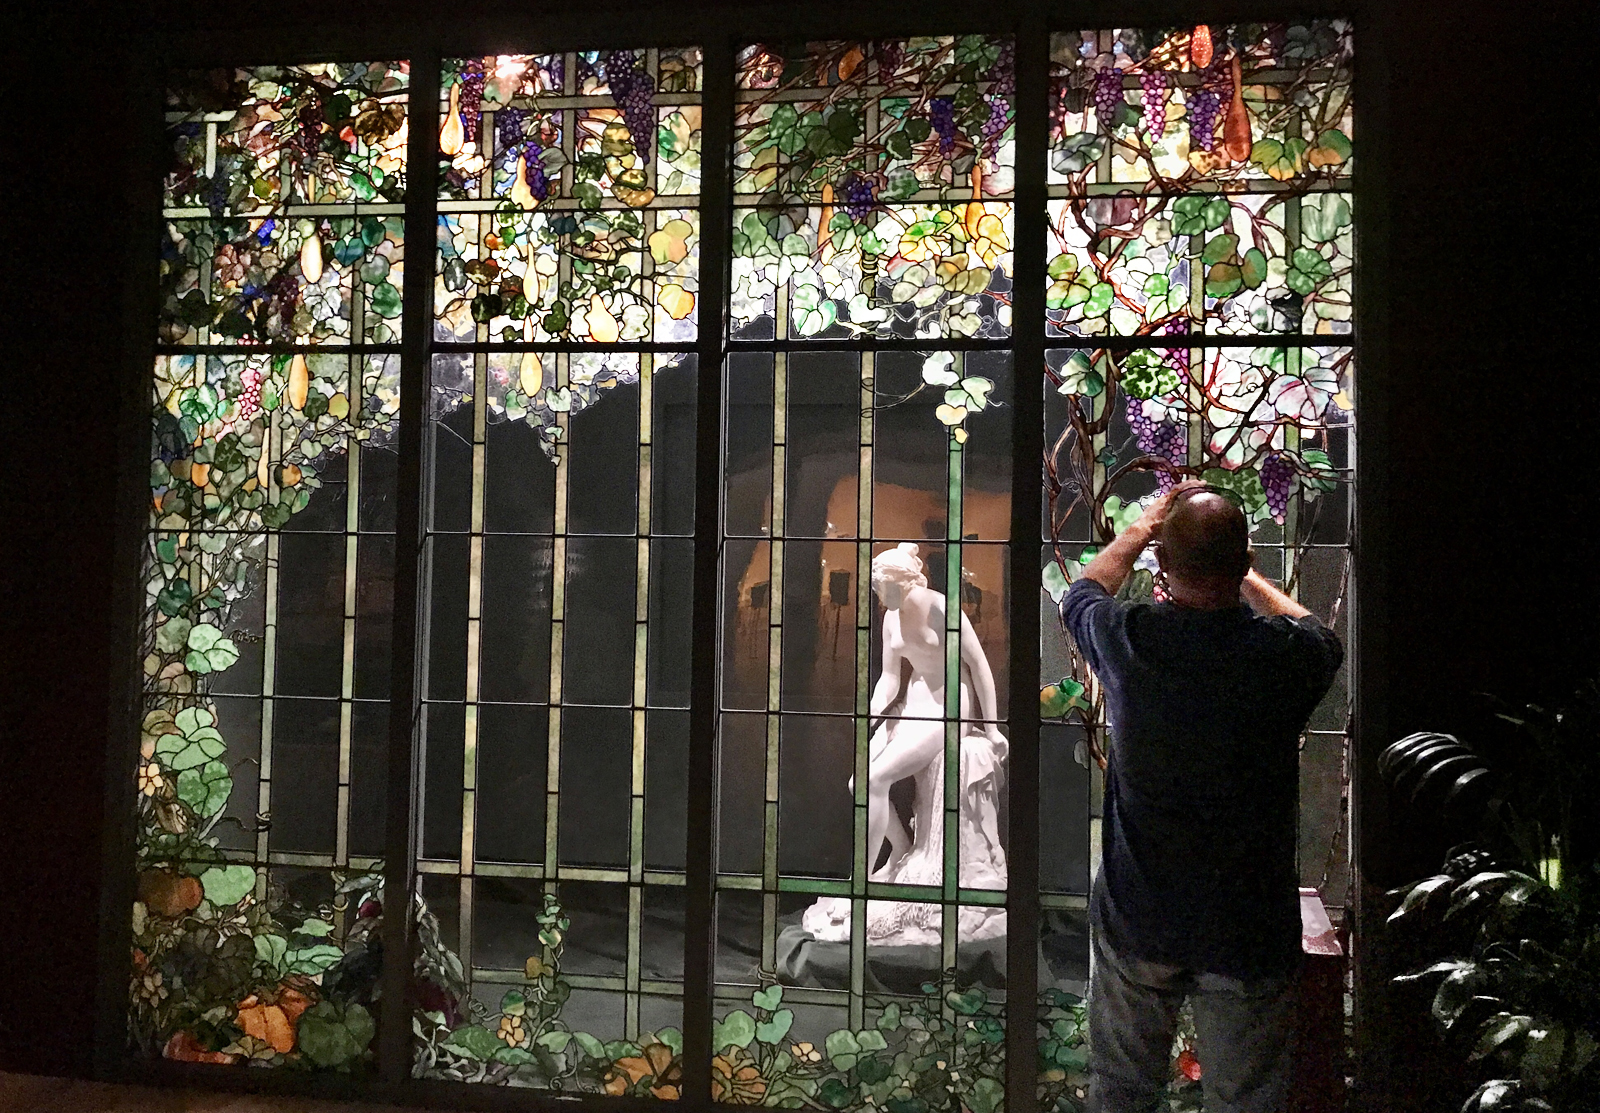 Things to do in Winter Park: A large Tiffany window in the Charles Hosmer Morse Museum of American Art. (Photo: Bonnie Gross)